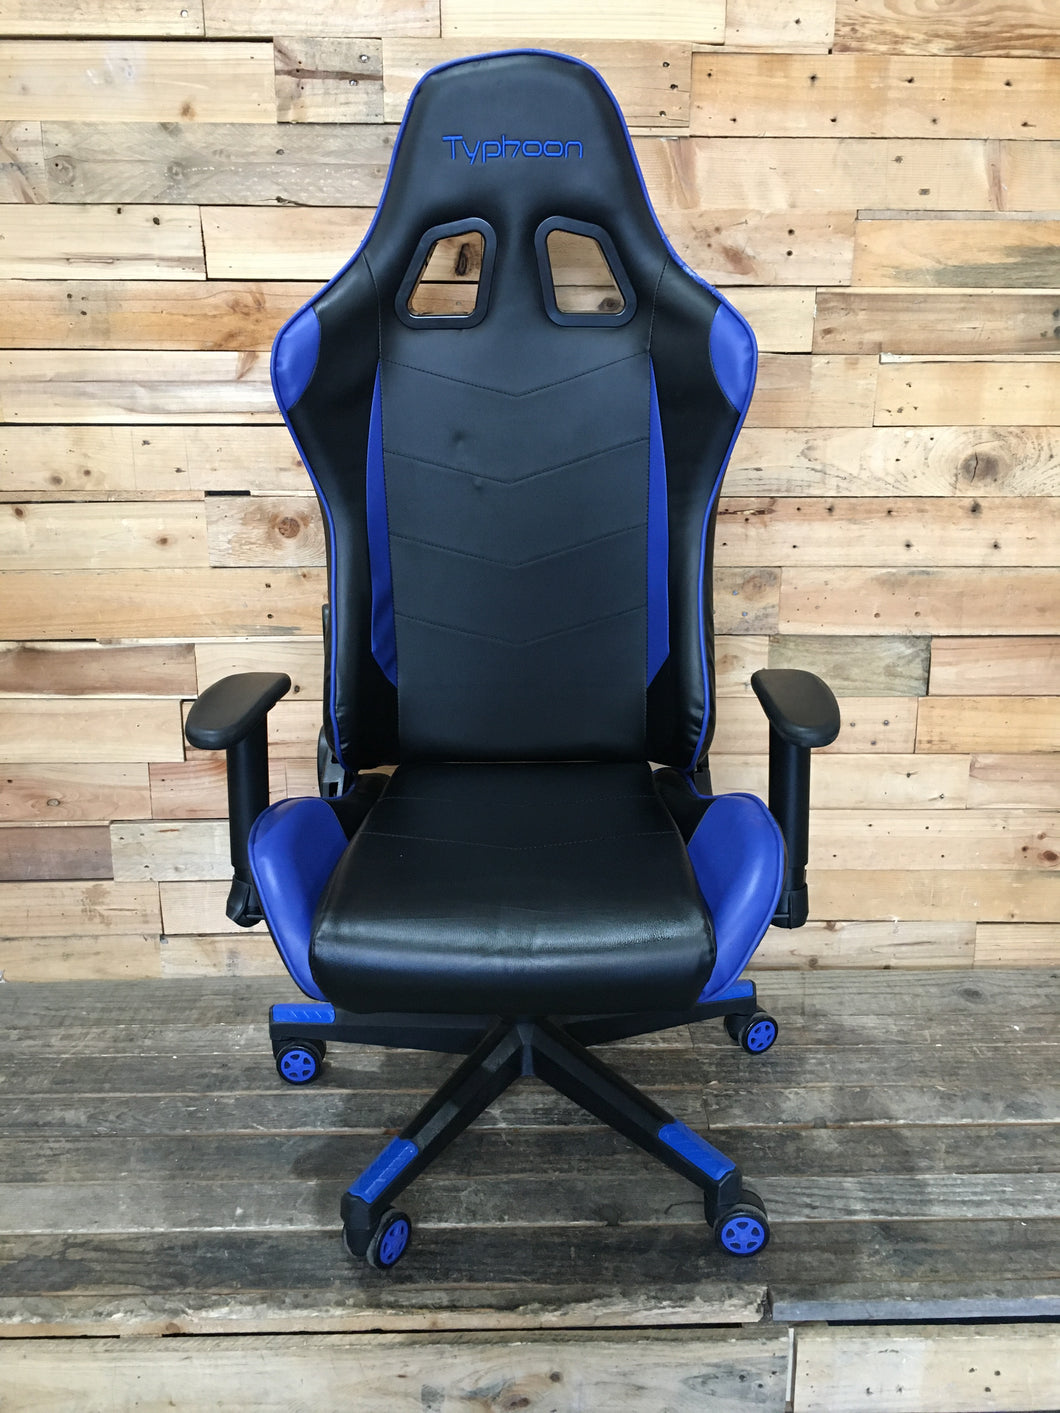 Black and Blue Gaming Chair with Blue Trim on Base